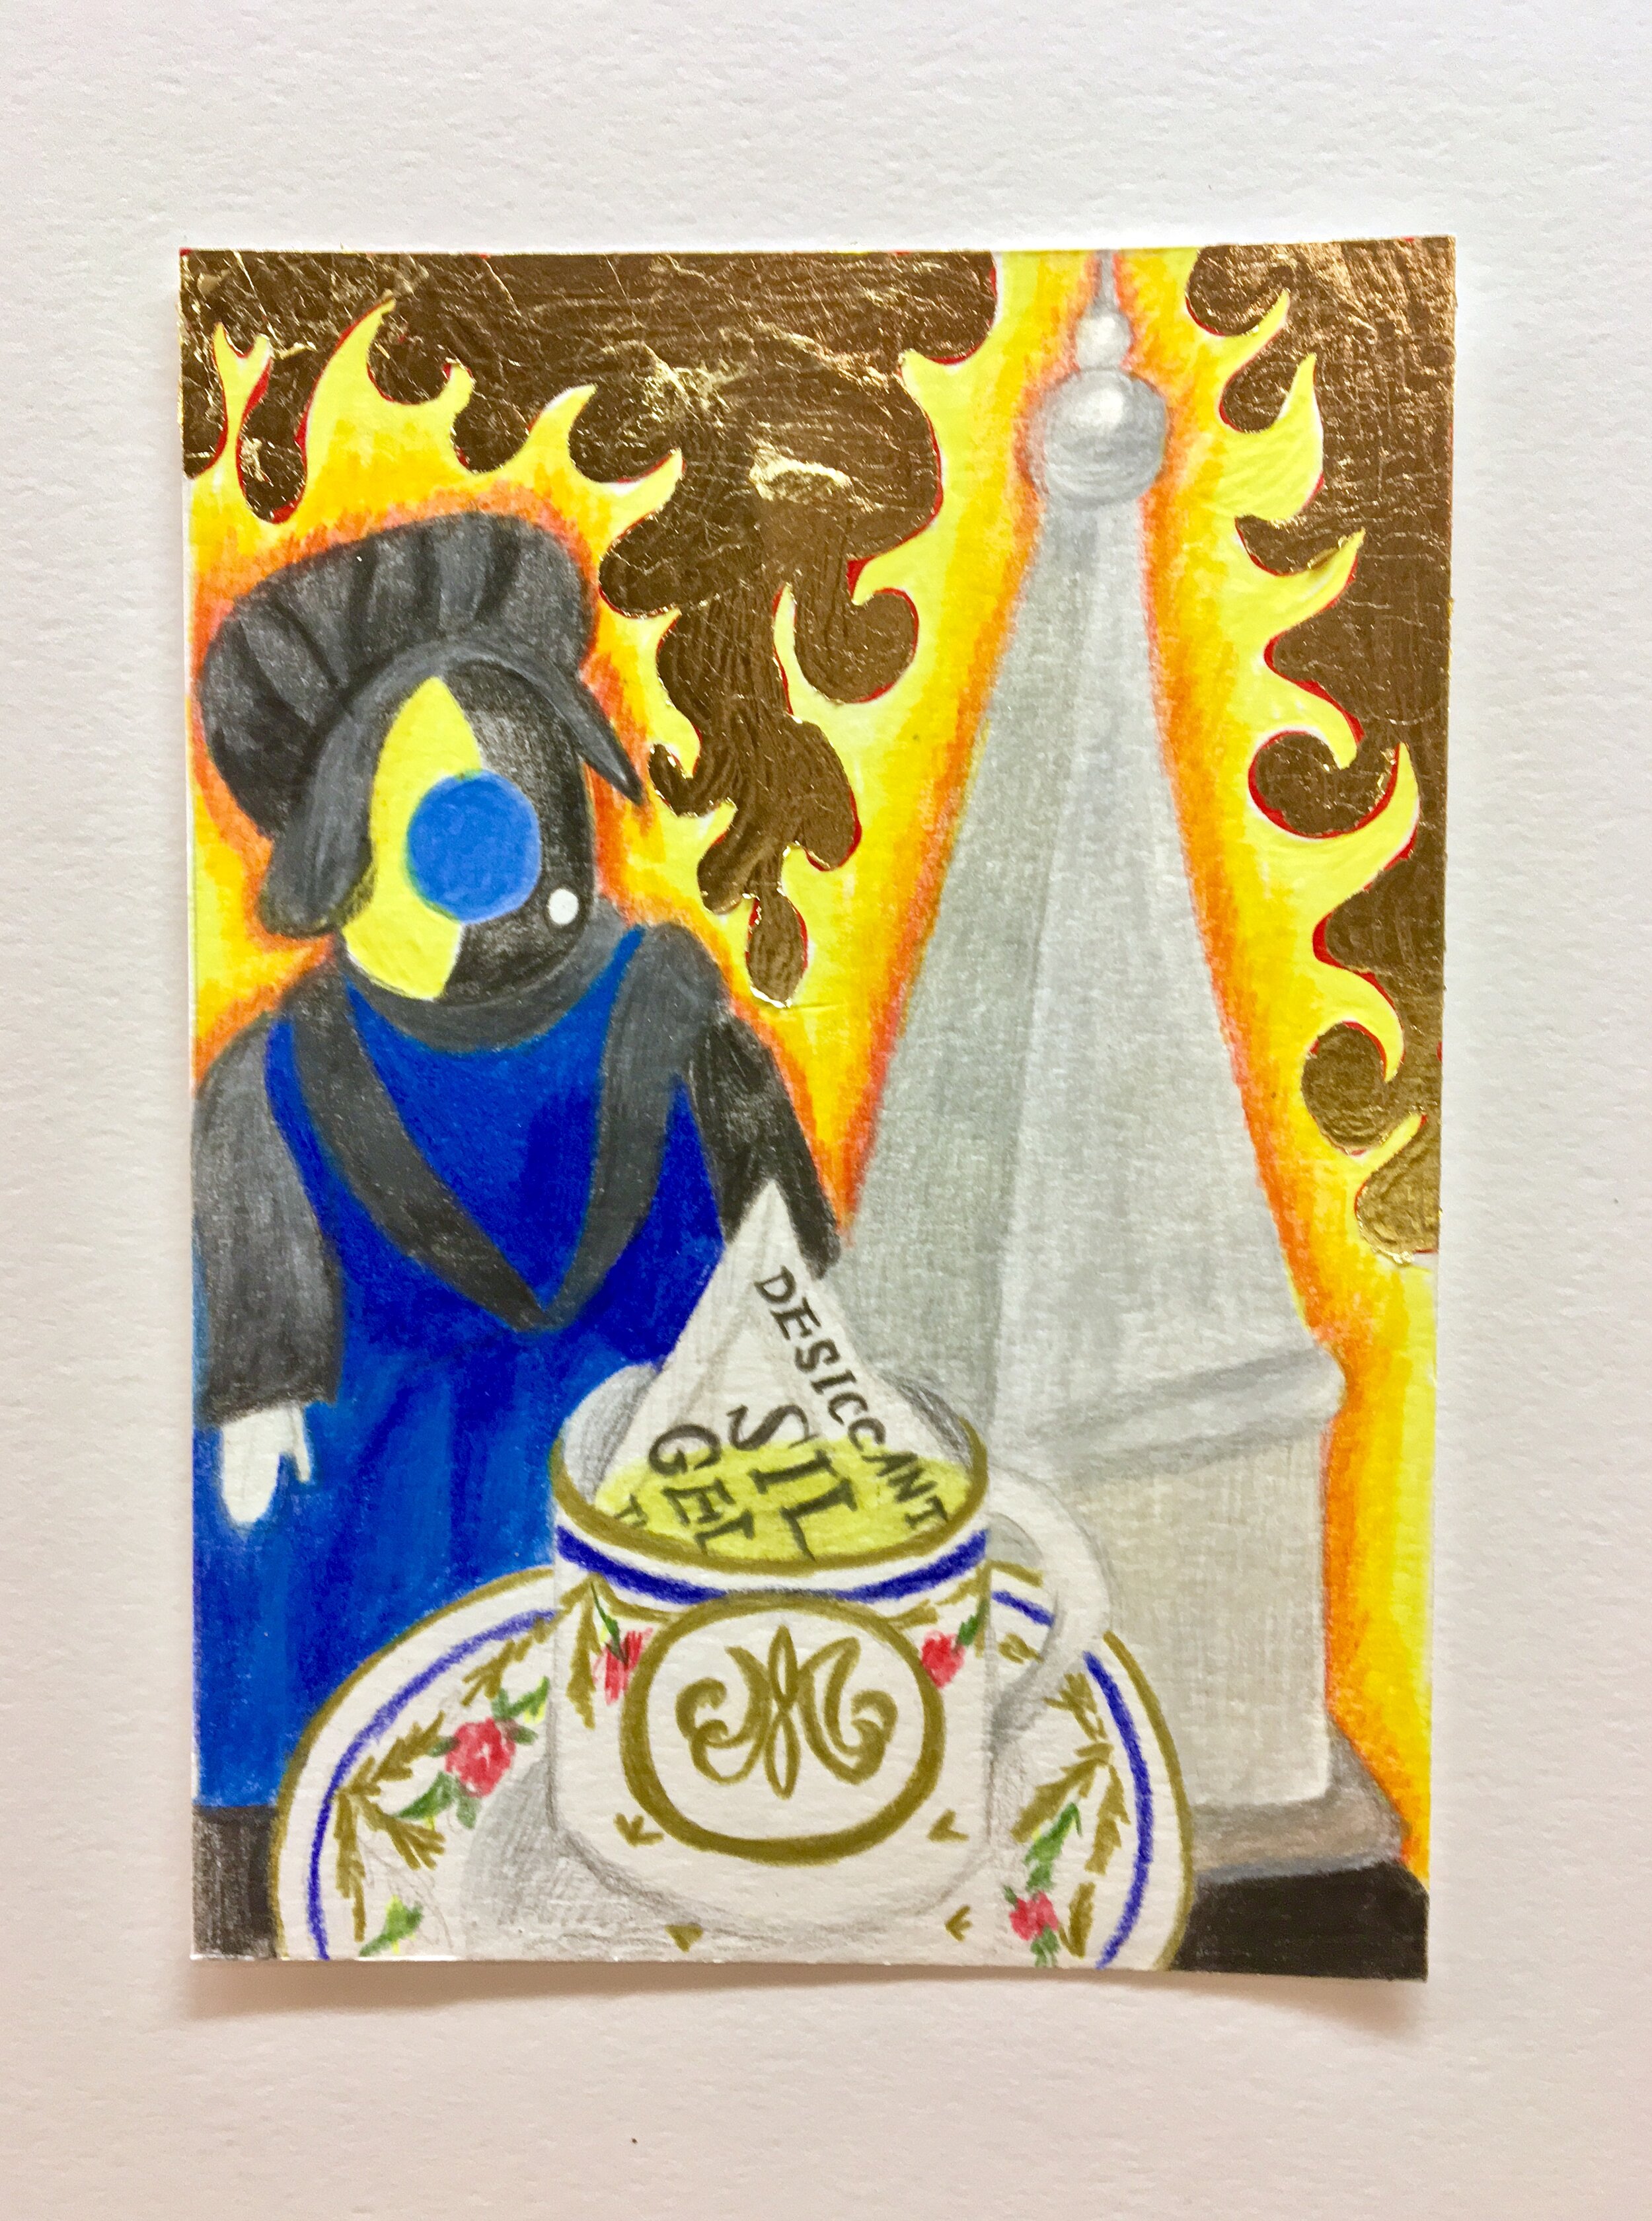   Amish Doll with Burning Monument and Marie Antoinette’s Tea Cup,  2018  8 x 6 inches (20.32 x 15.24 cm.)  Colored pencil and gold leaf on paper  Private collection 